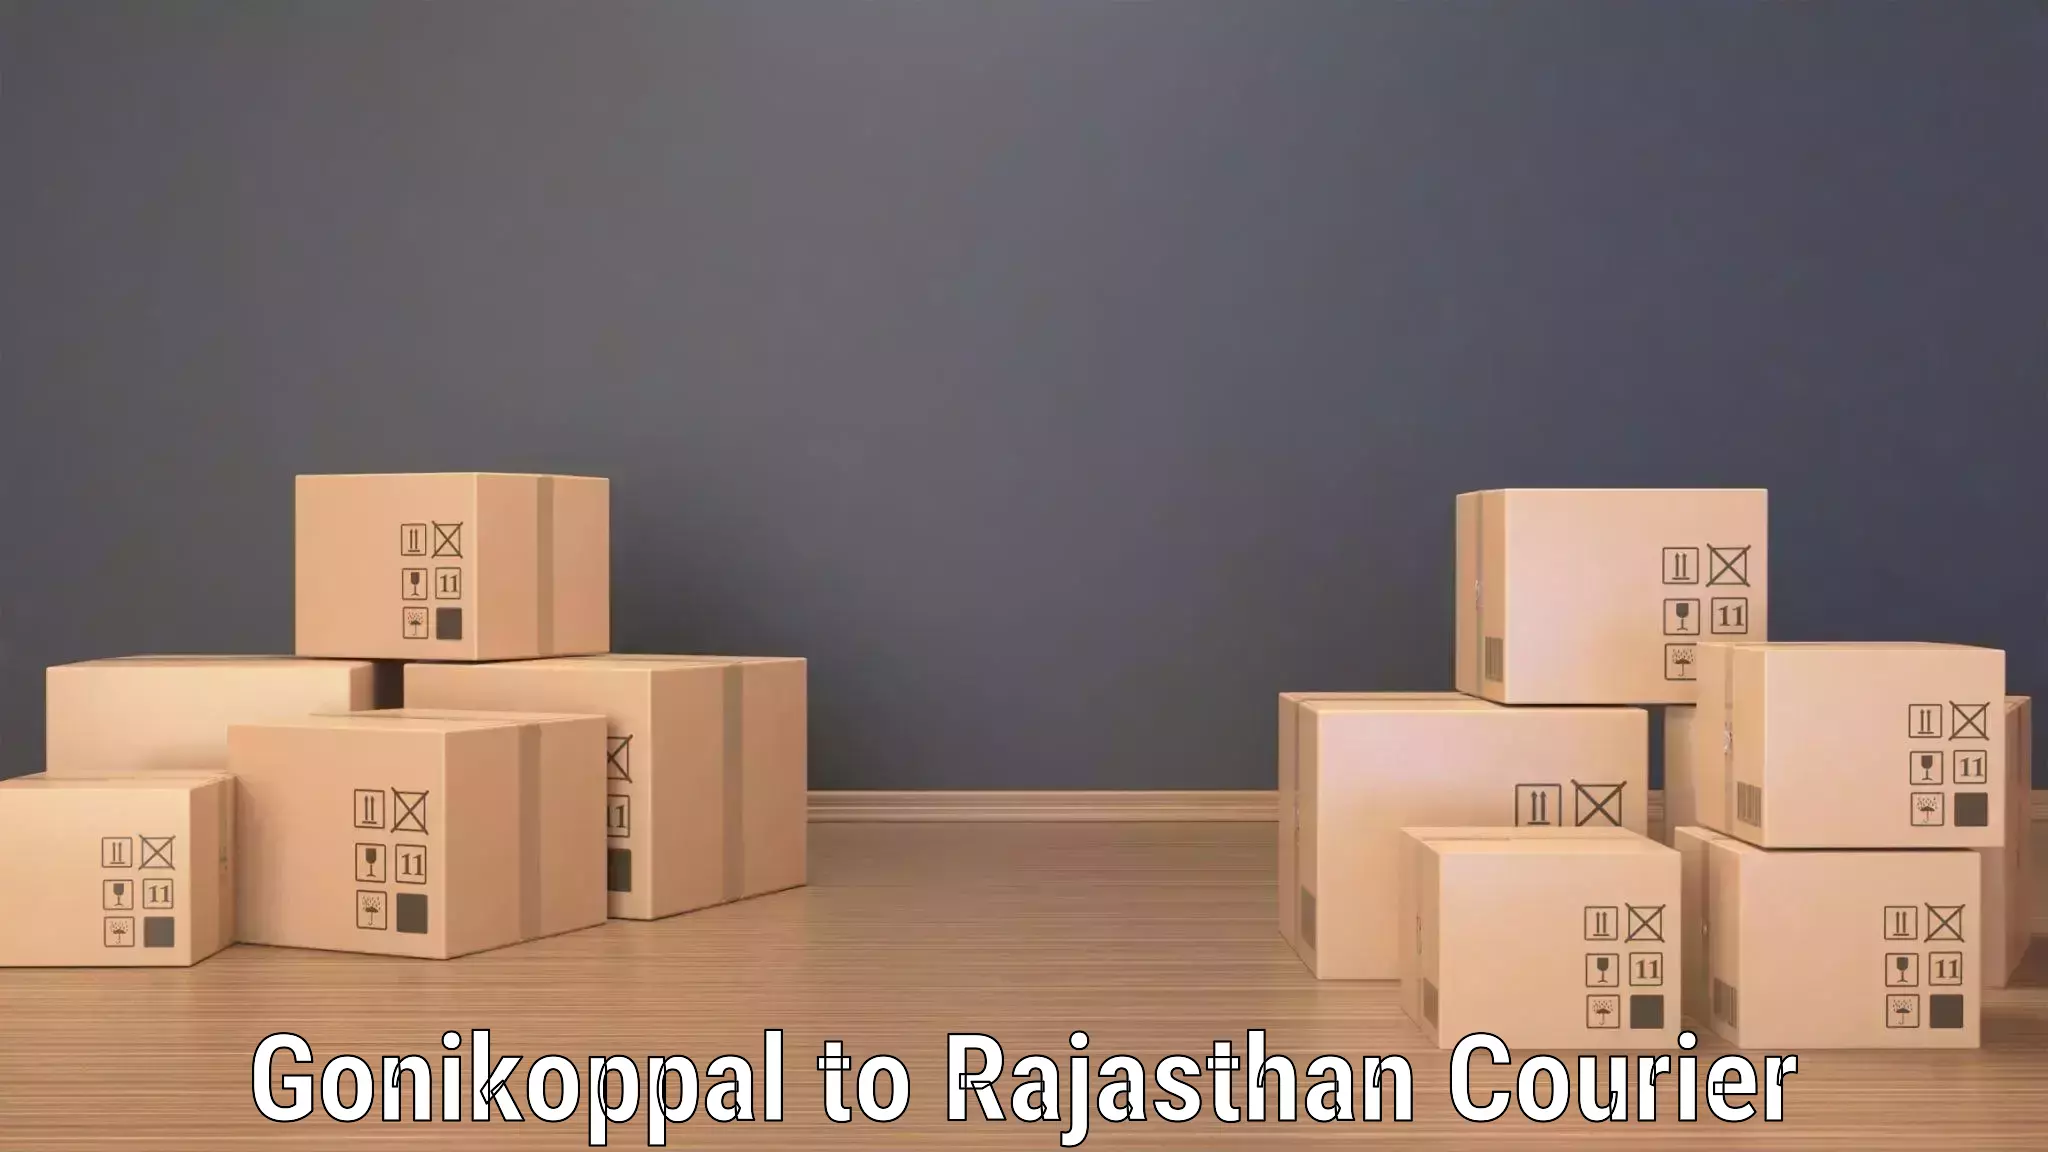 Fast delivery service Gonikoppal to Mathania